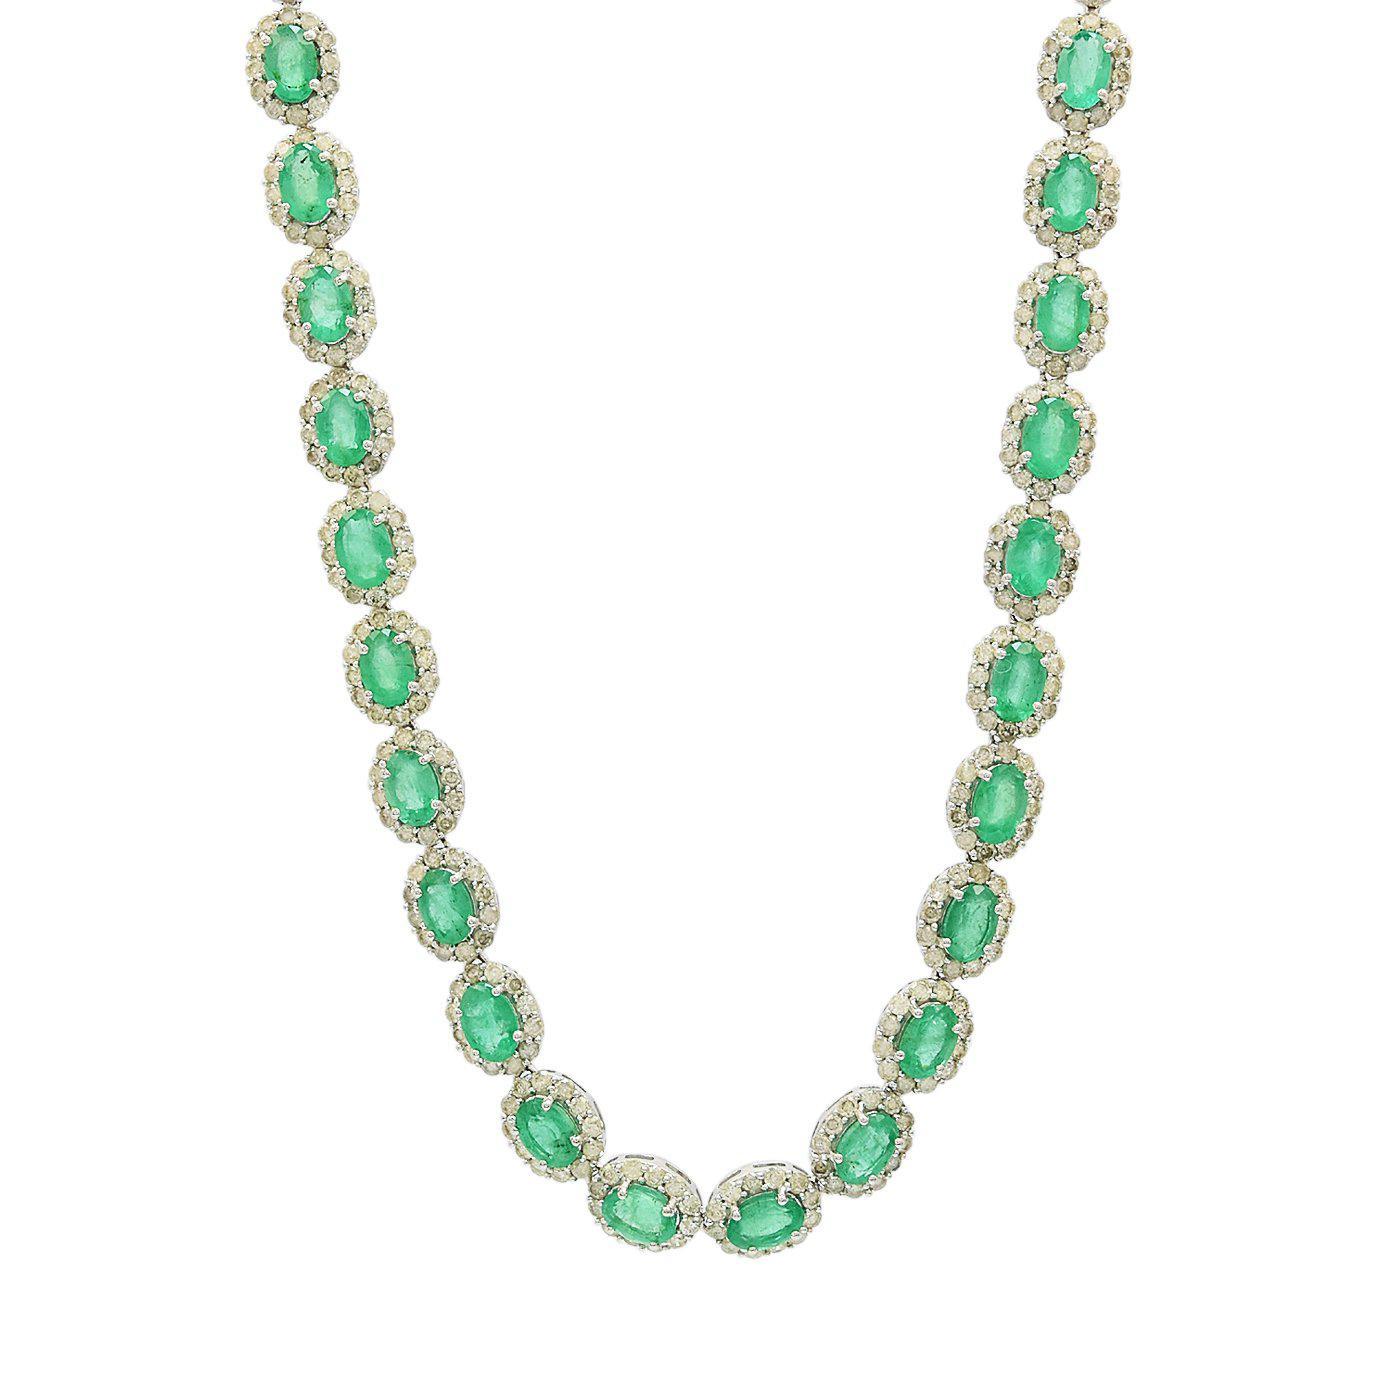 One electronically tested 14KT white gold ladies cast & assembled emerald and diamond necklace. Seventeen inch length necklace features a flexible emerald and diamond ribbon, terminating in a concealed clasp with twin safeties. Bright polish finish.